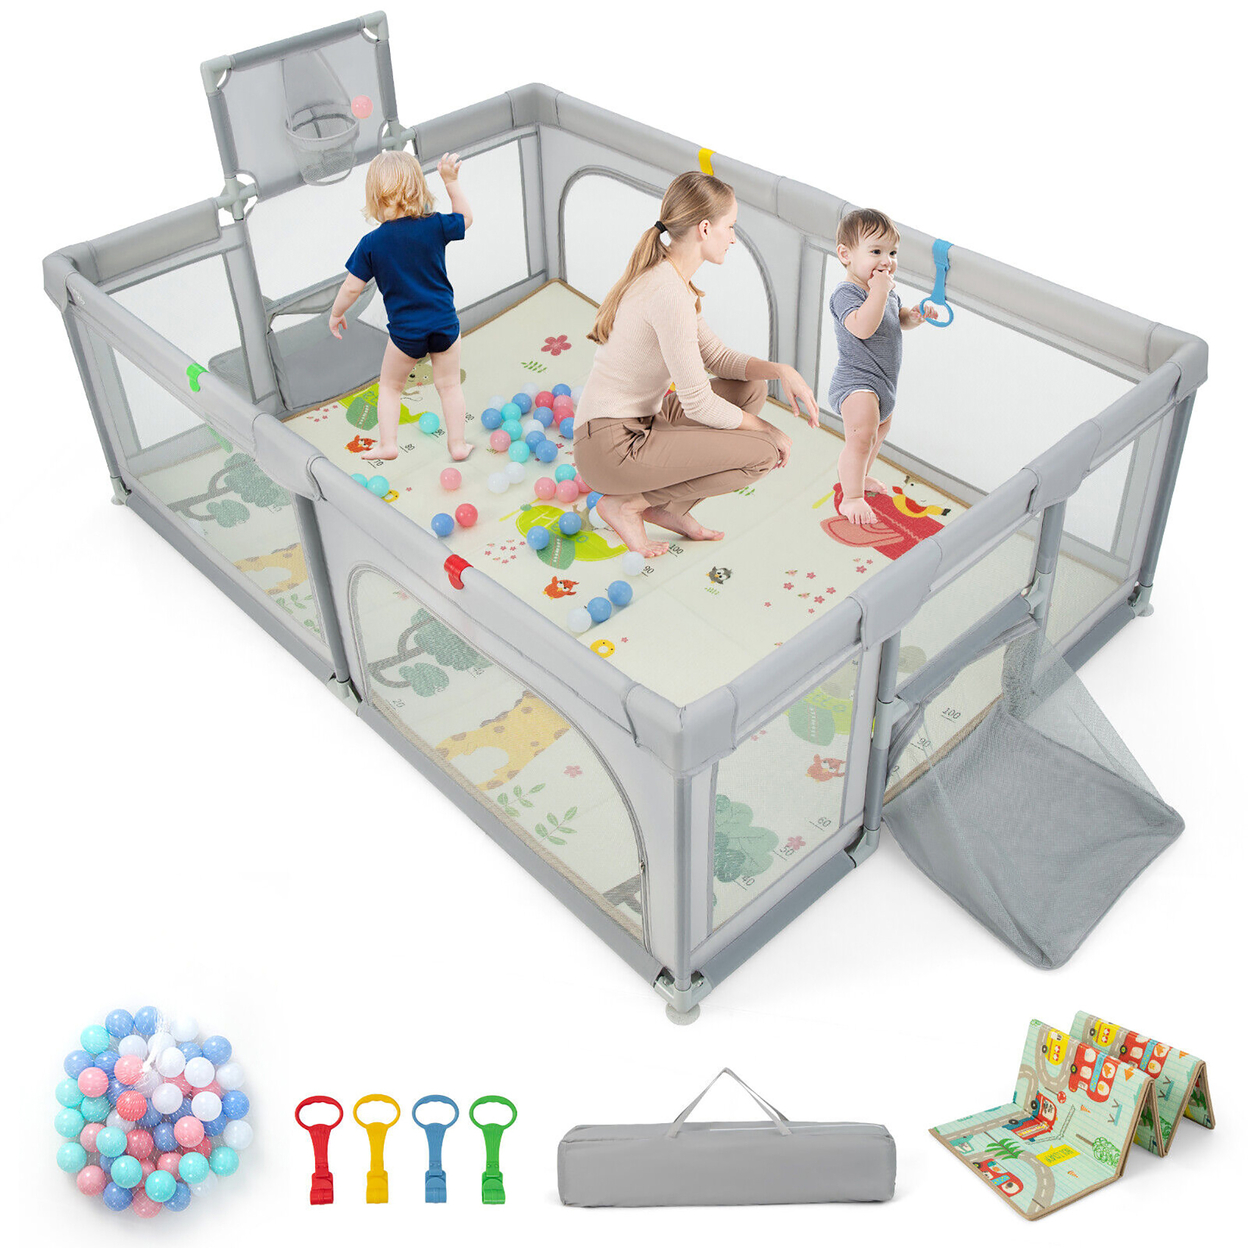 Baby Playpen Large Safe Play Yard Fun Activity Center With Mat & Soccer Nets - Light Grey